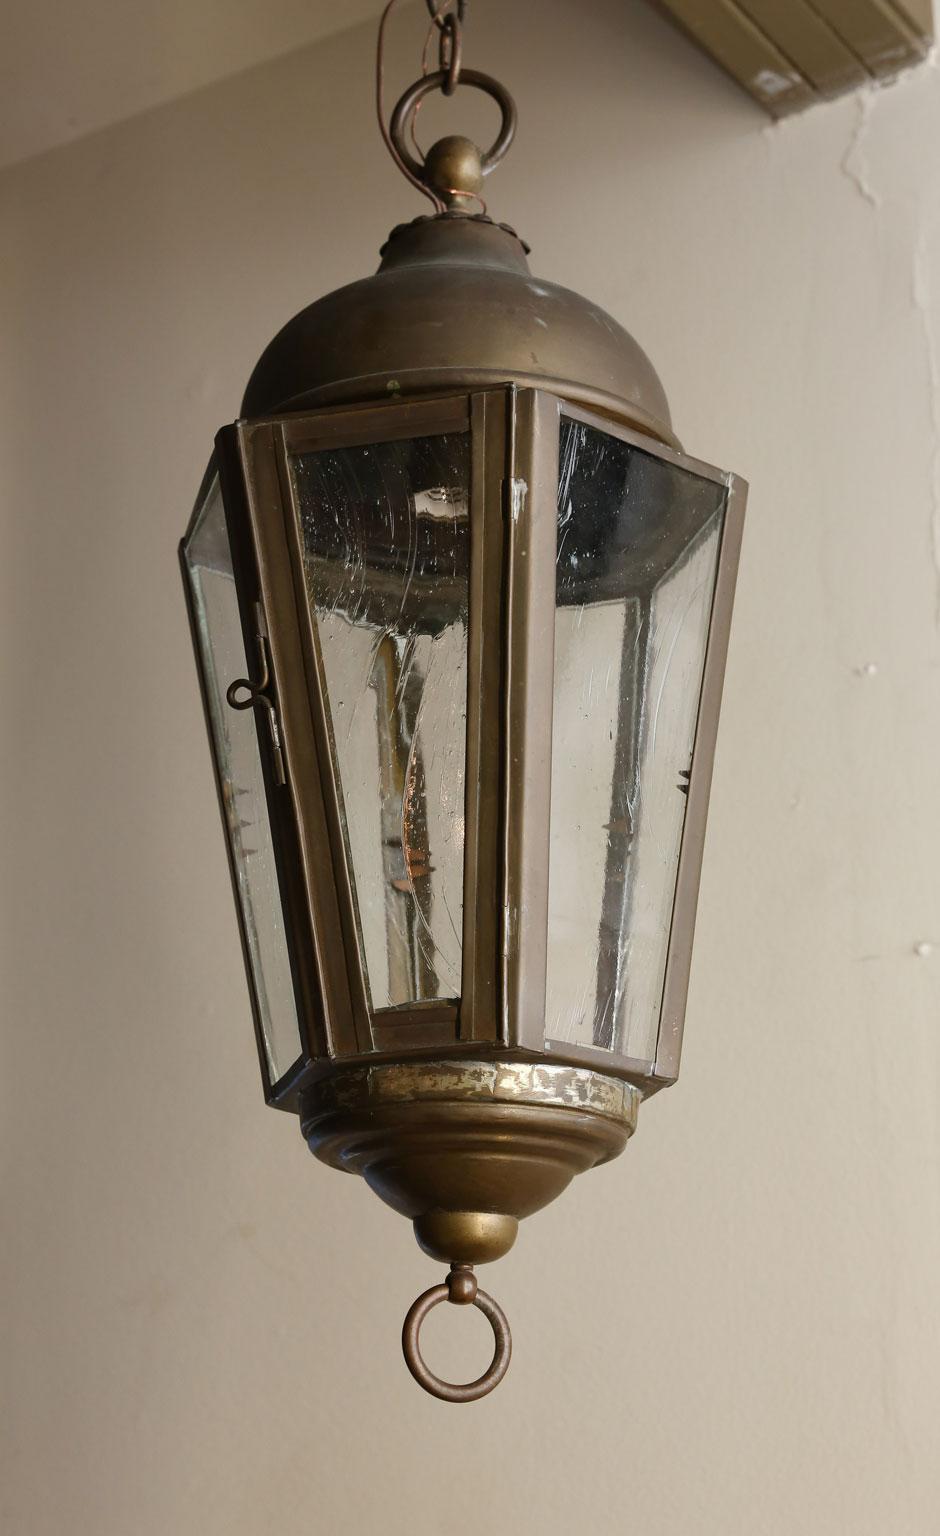 The lantern has been newly wired in the US and has reproduction German wavy glass installed. It has been newly wired in the US. The patina is nice and original. There is just one of these lanterns. The measurement is to the top of the lantern and